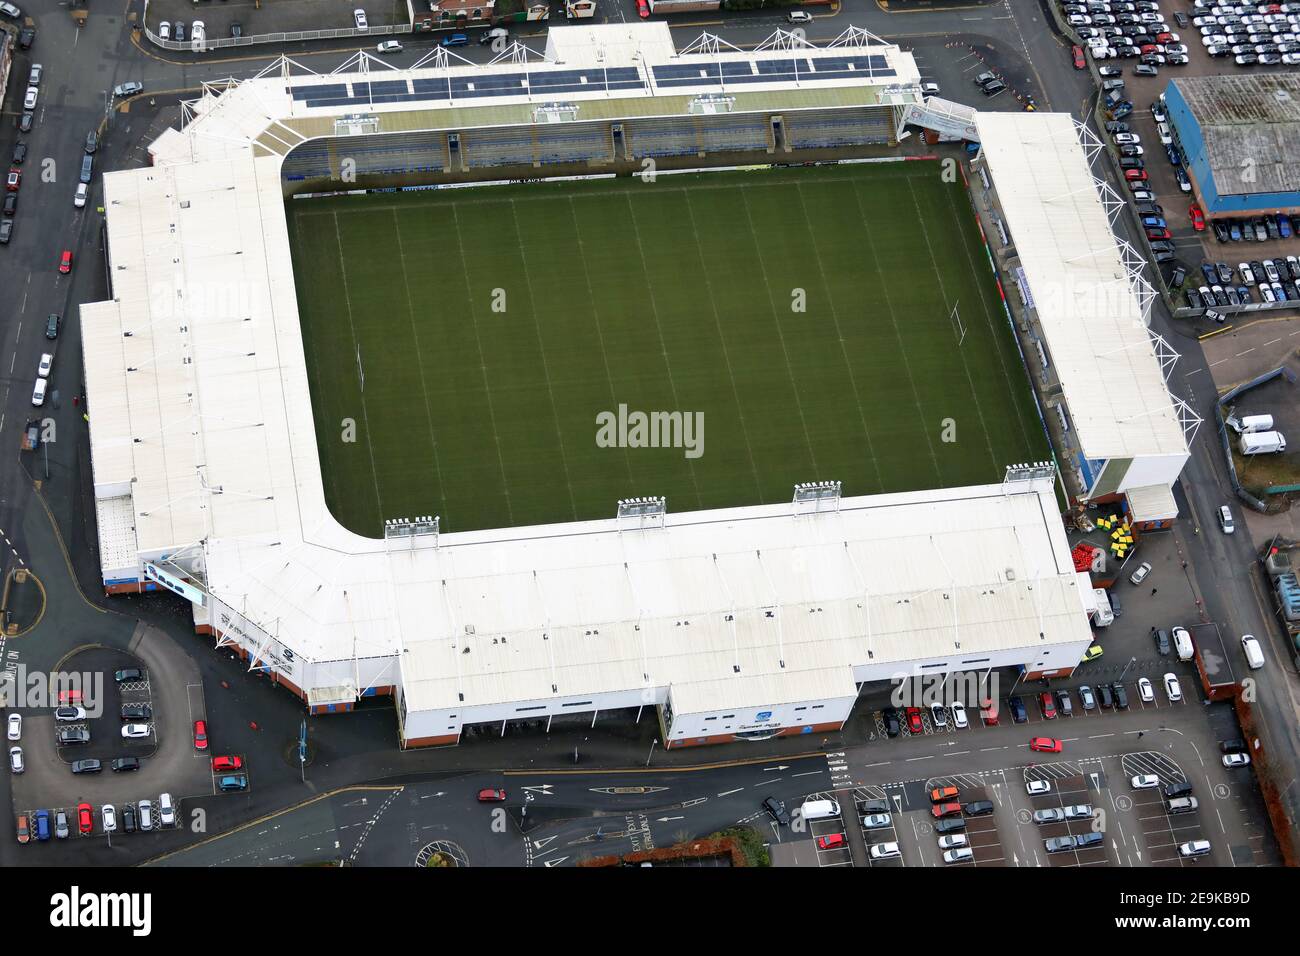 aerial view of The Halliwell Jones Stadium rugby league ground and conference centre. Home to Warrington Wolves Rugby club. Stock Photo